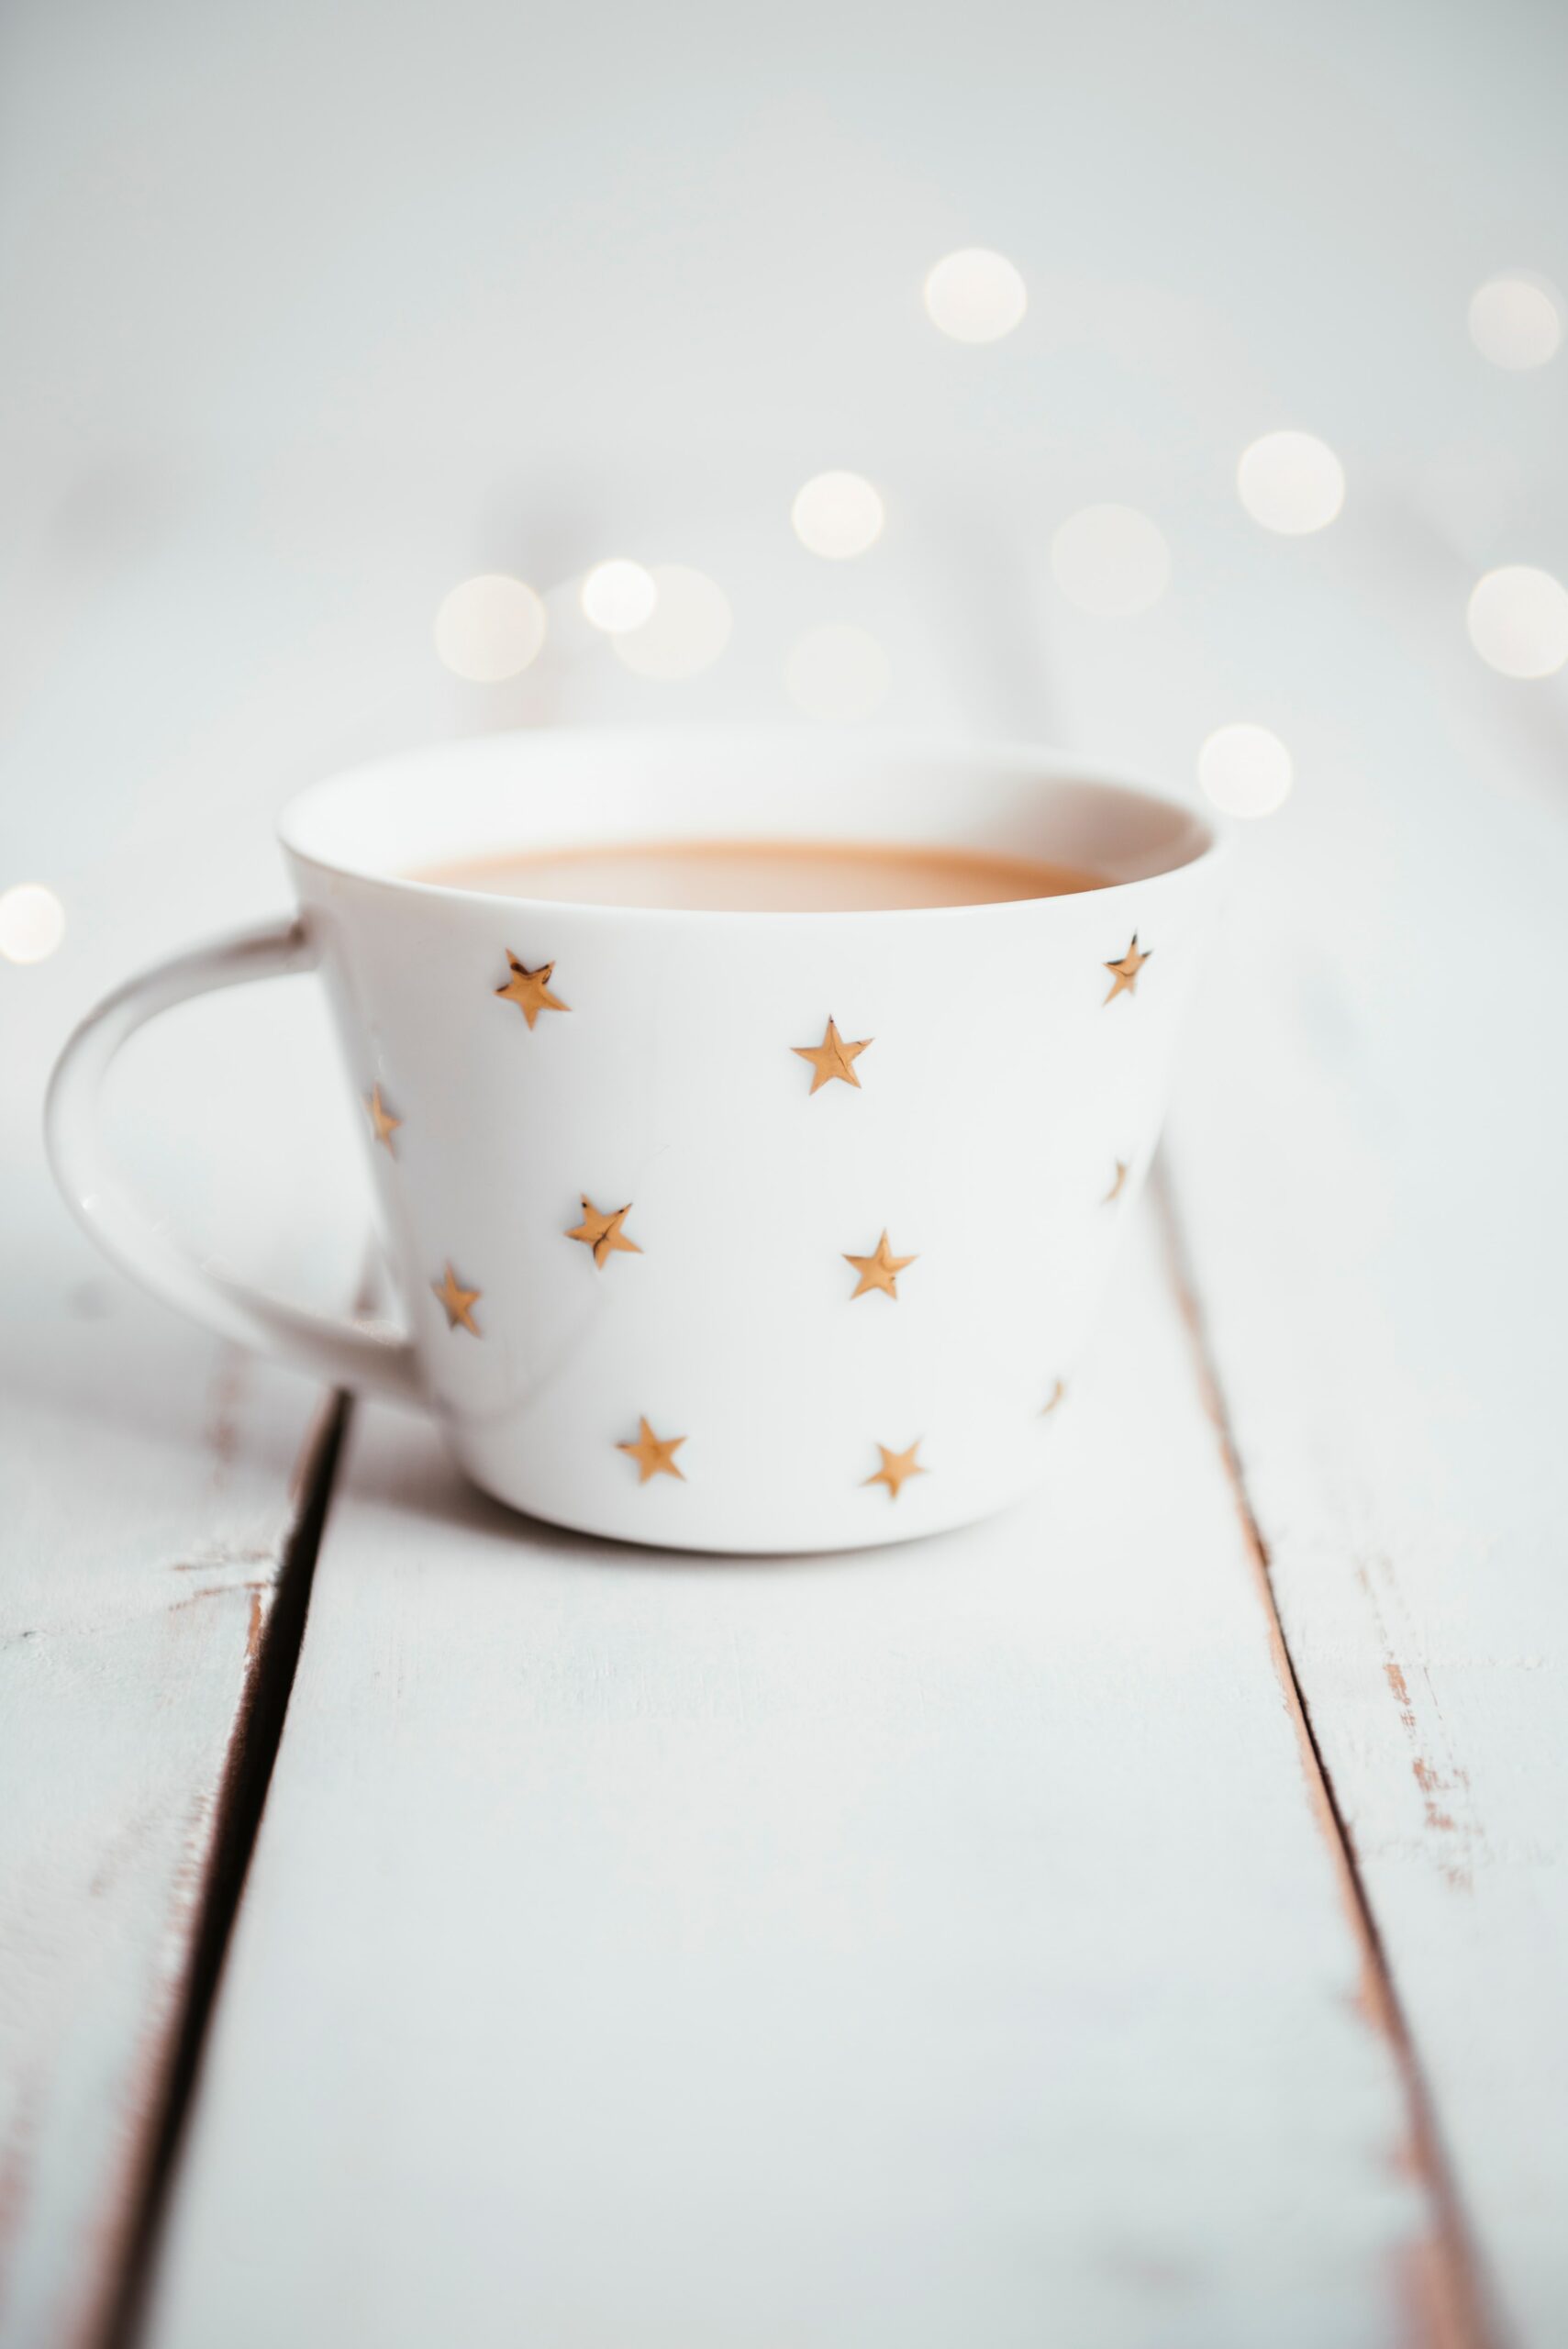 Image of a white mug with repeating gold stars on a white table. Small white lights are to the middle right.